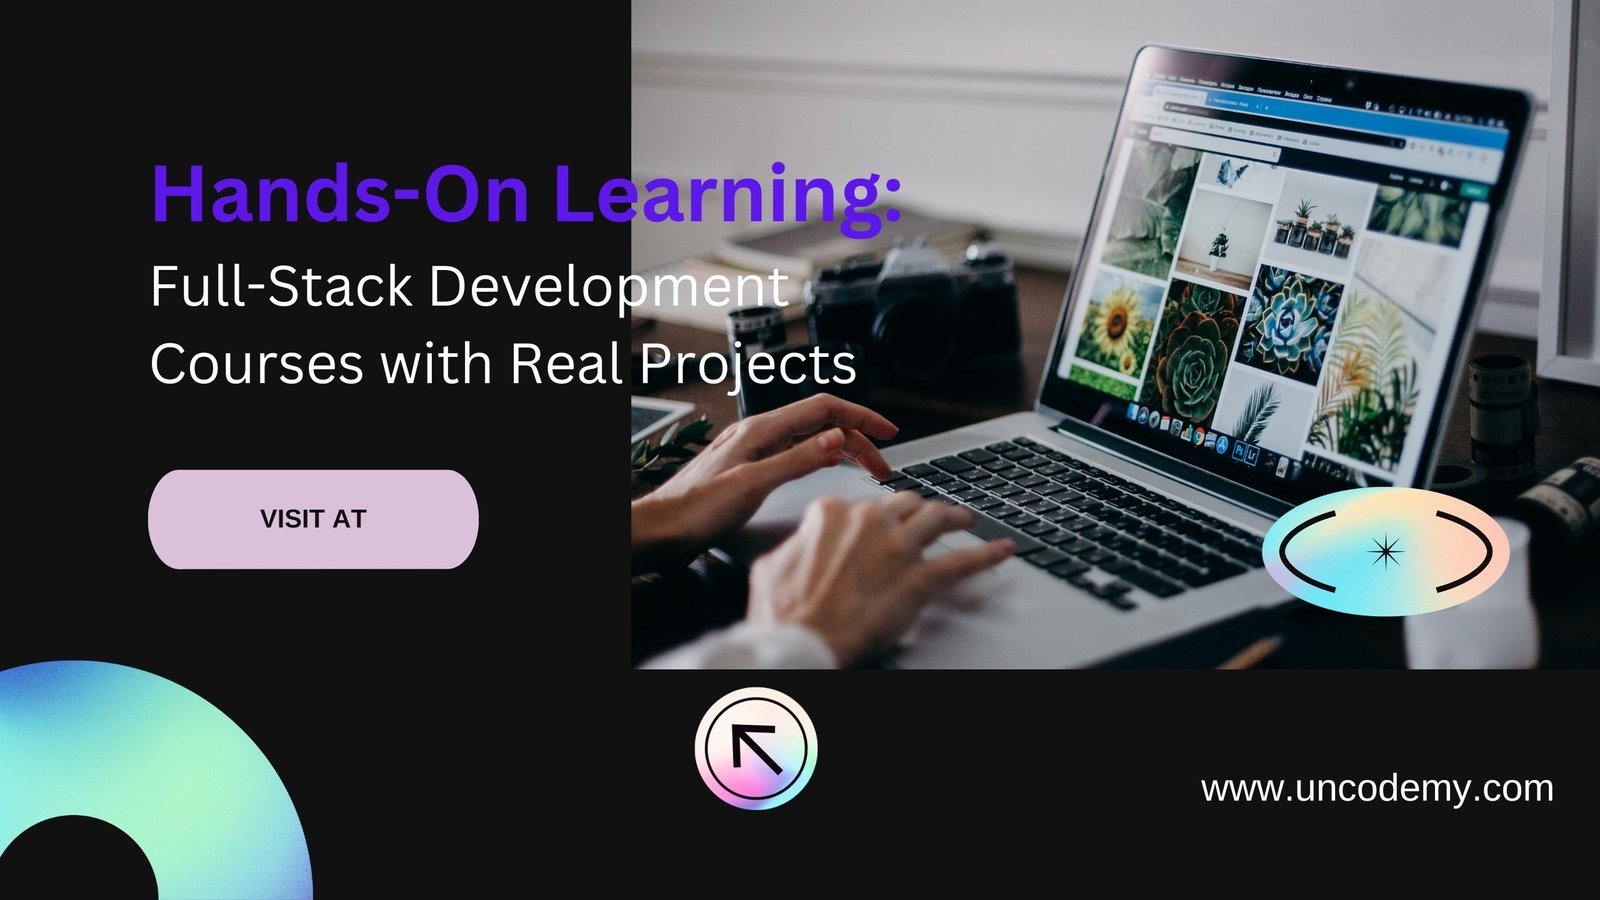 Hands-On Learning Full-Stack Development Courses with Real Projects